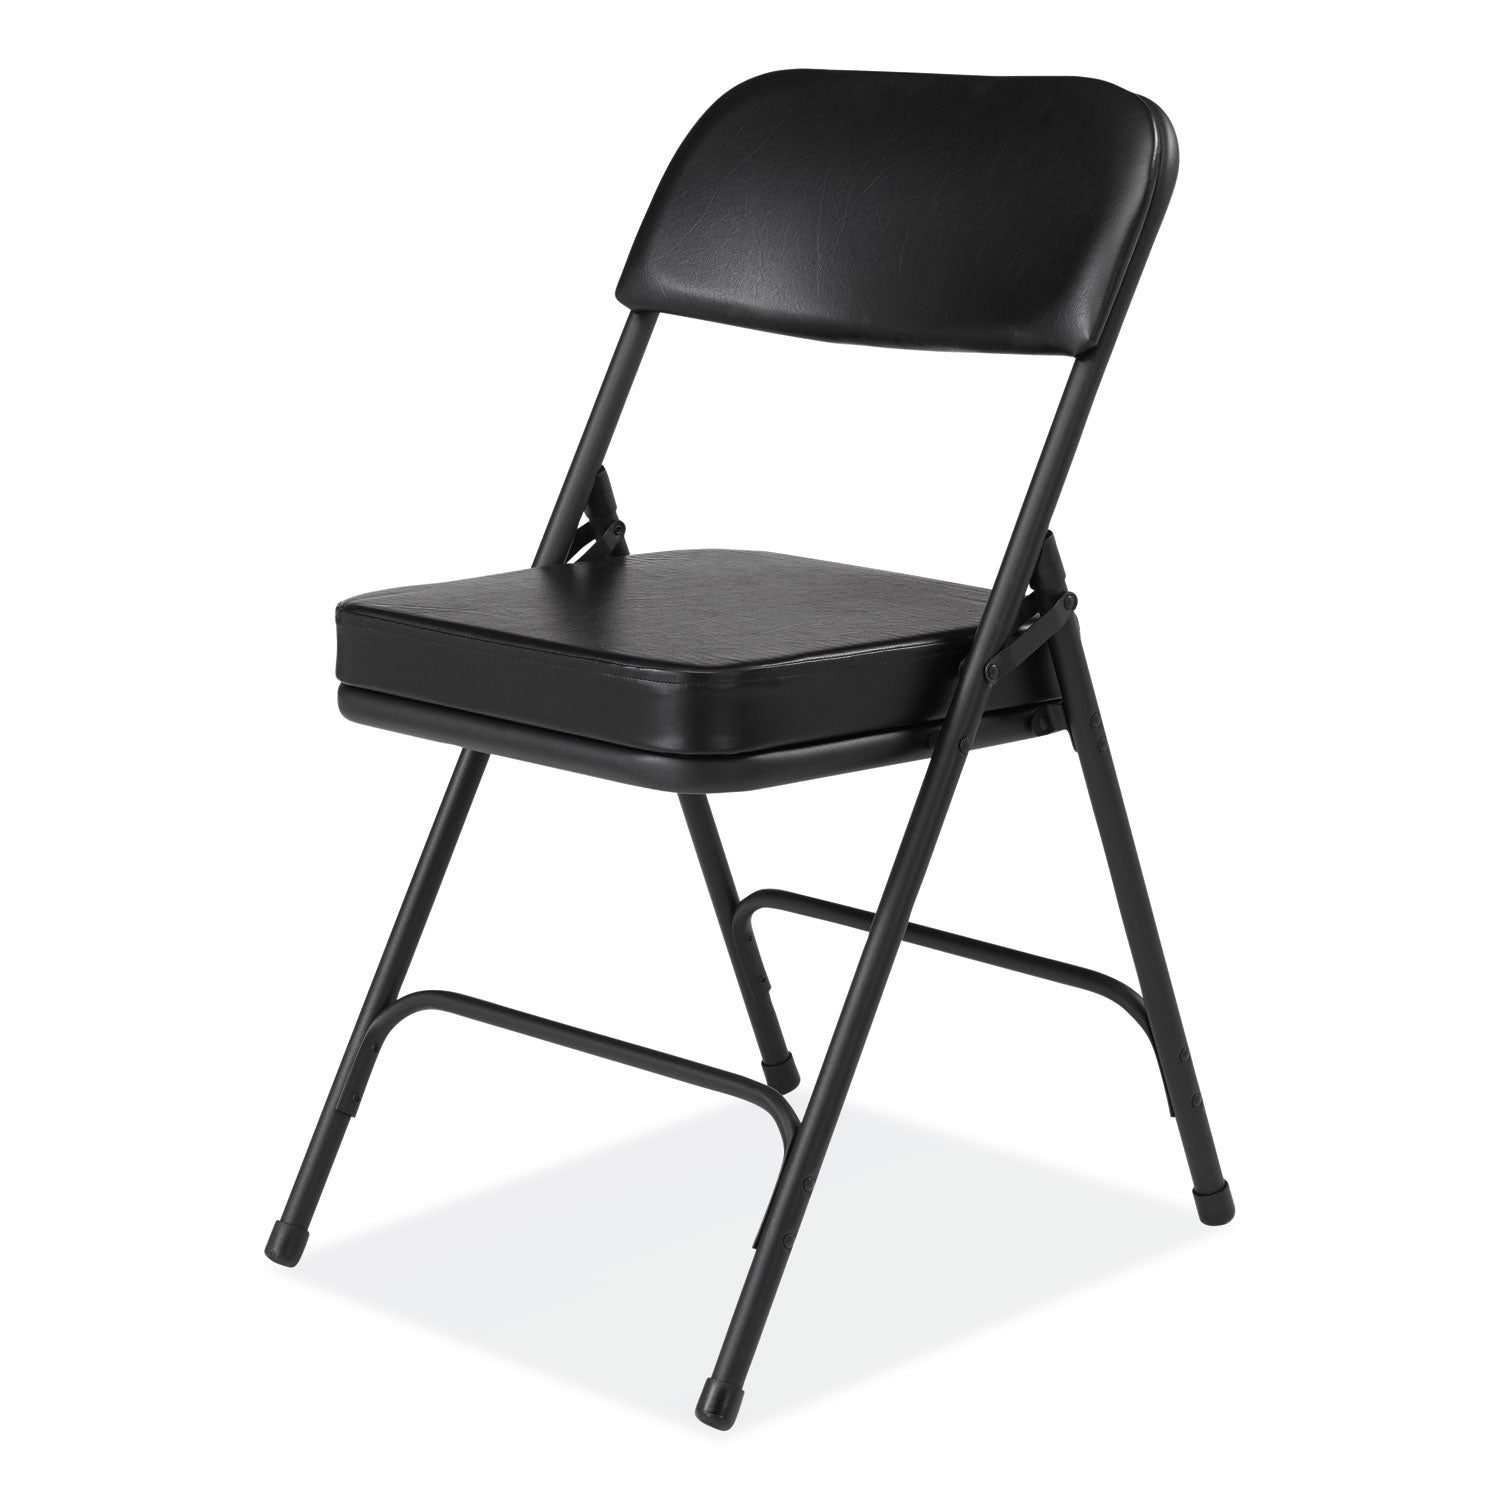 3200-series-2-vinyl-upholstered-double-hinge-folding-chair-supports-300lb-185-seat-ht-black-2-ctships-in-1-3-bus-days_nps3210 - 3